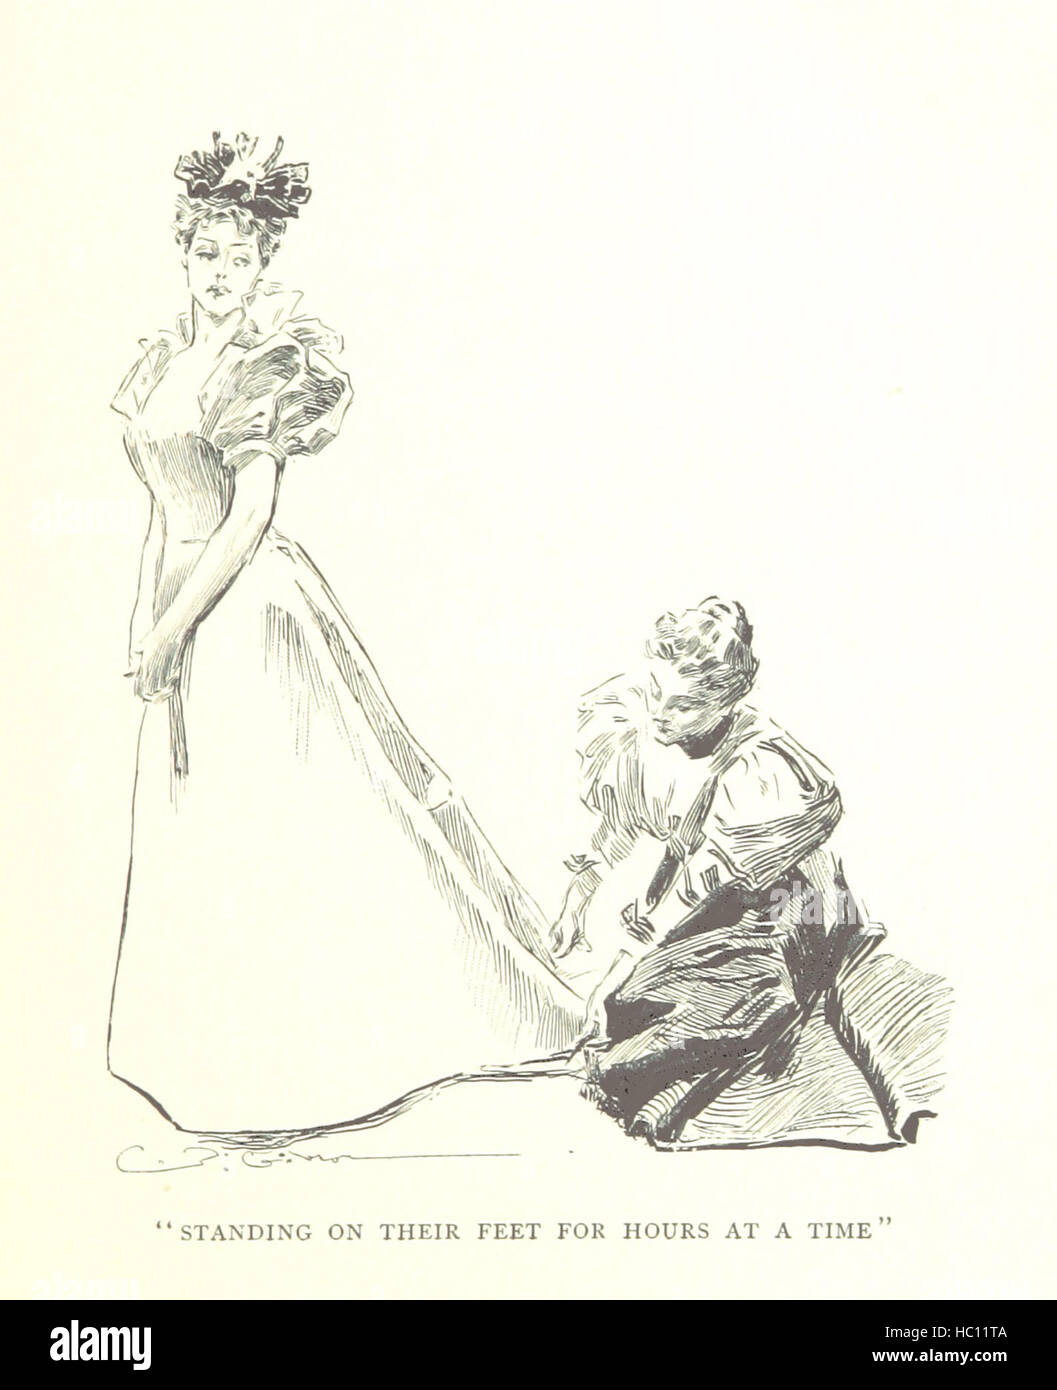 Image taken from page 203 of 'About Paris ... Illustrated by Charles Dana Gibson' Image taken from page 203 of 'About Paris  Illustrated Stock Photo